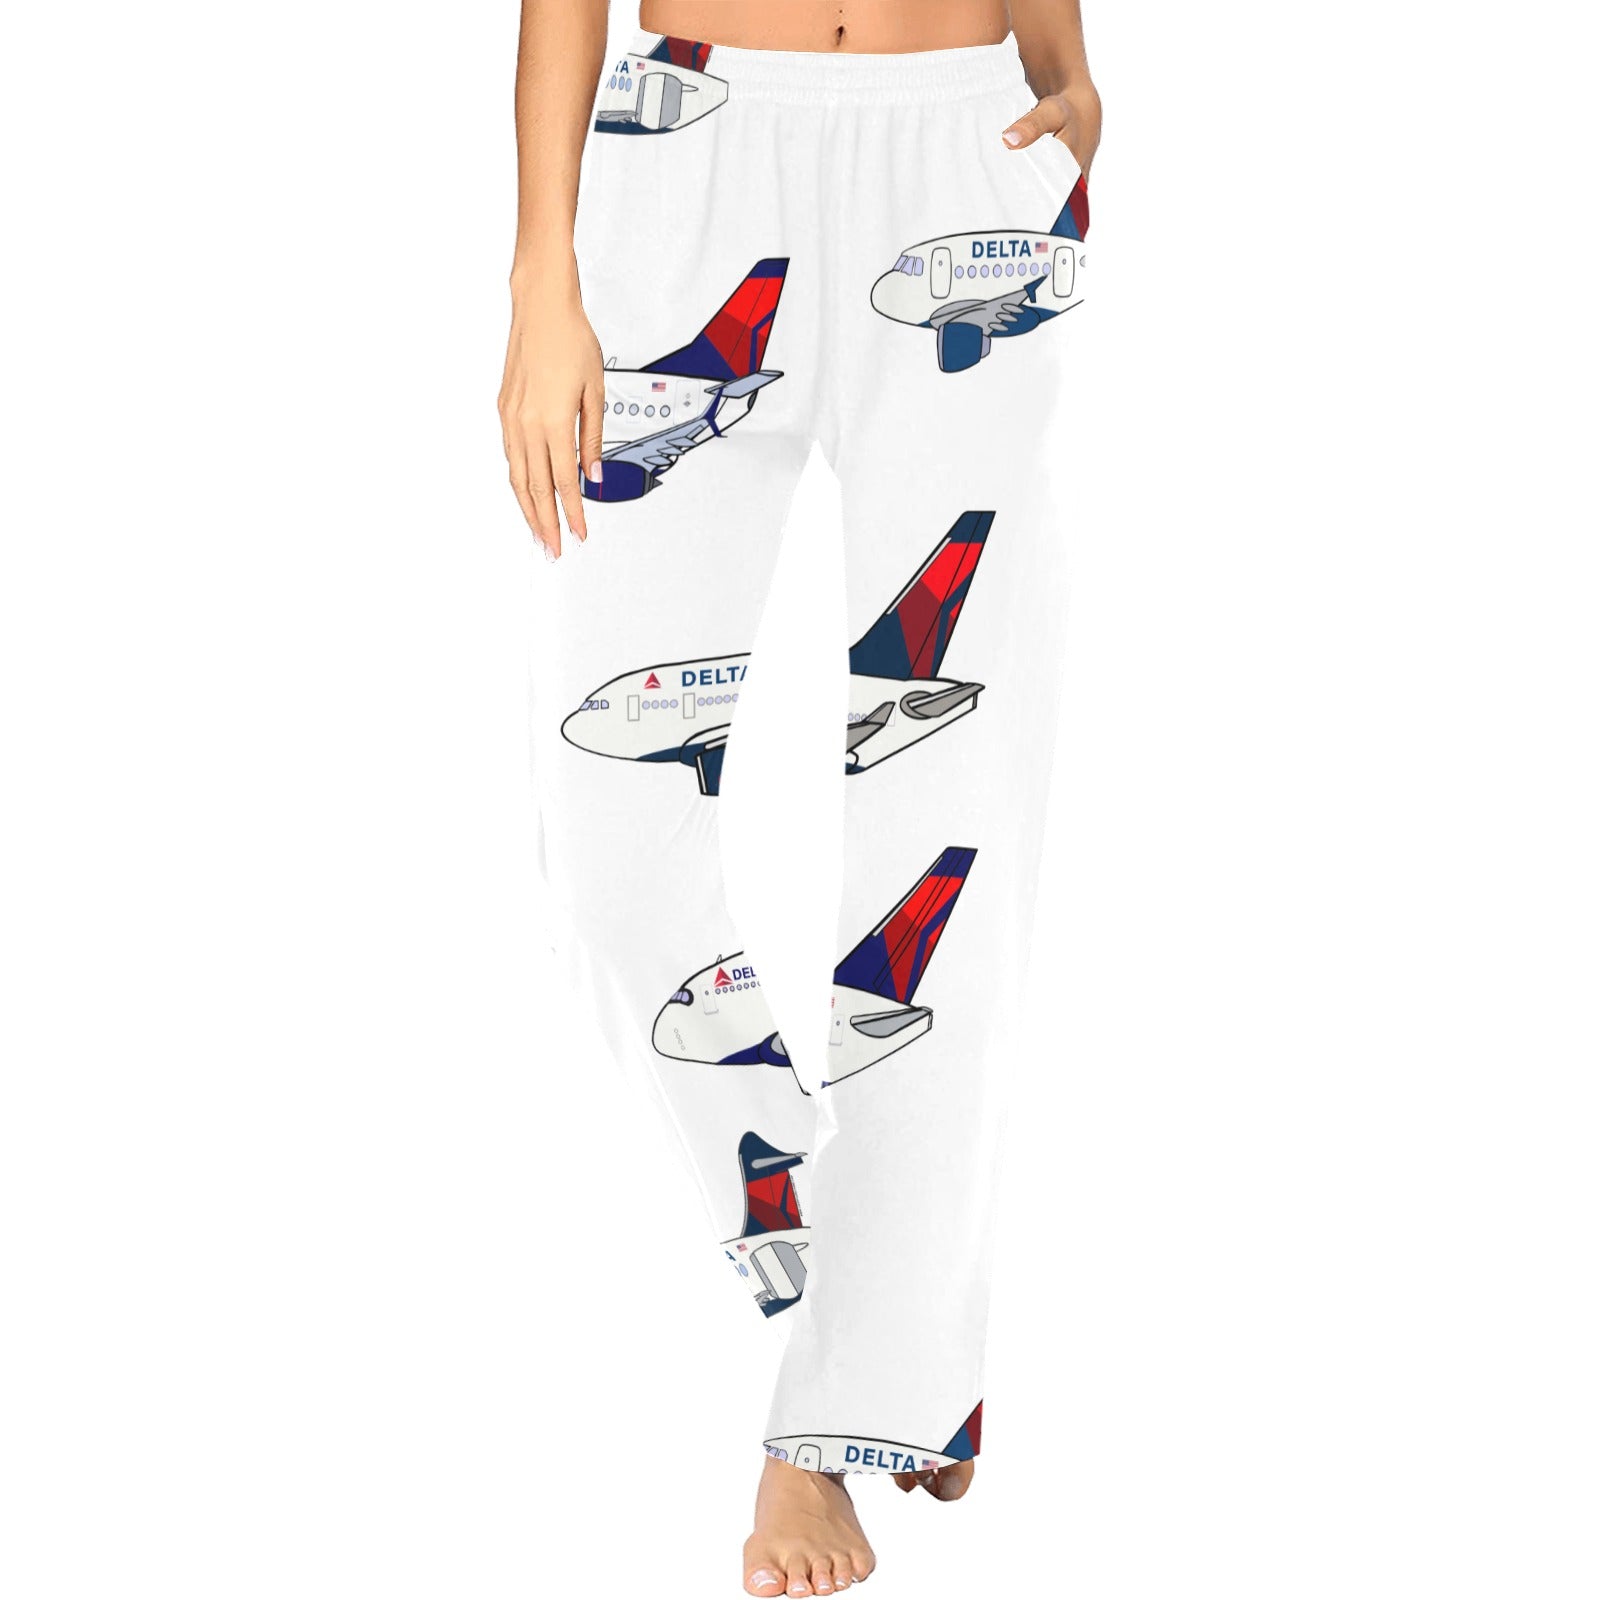 Image displays front view of a human wearing white pants with Delta airplane design